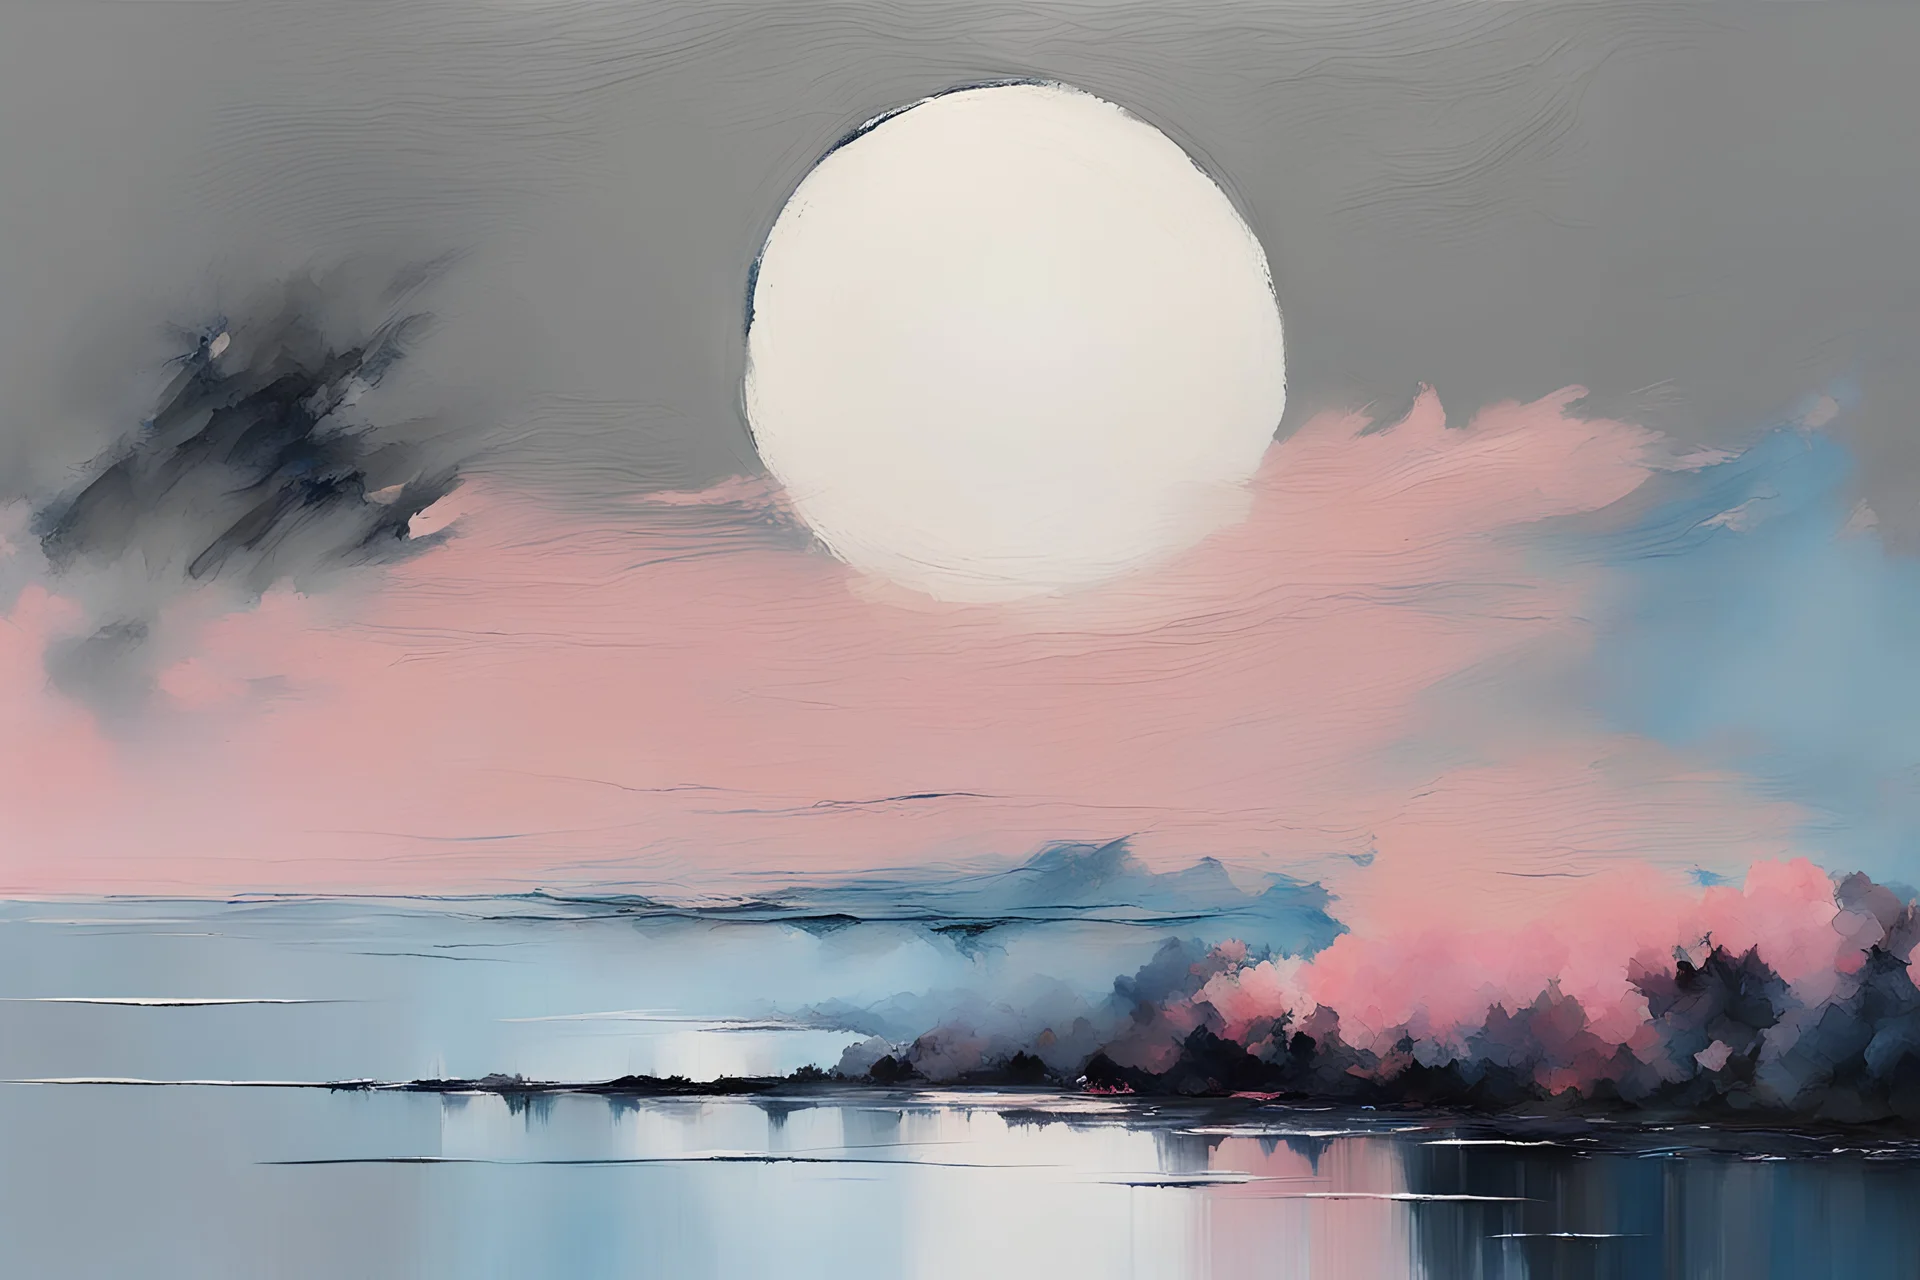 Grey, blue, and pink abstract landscape painting with planet, and lake, abstract impressionism paintings